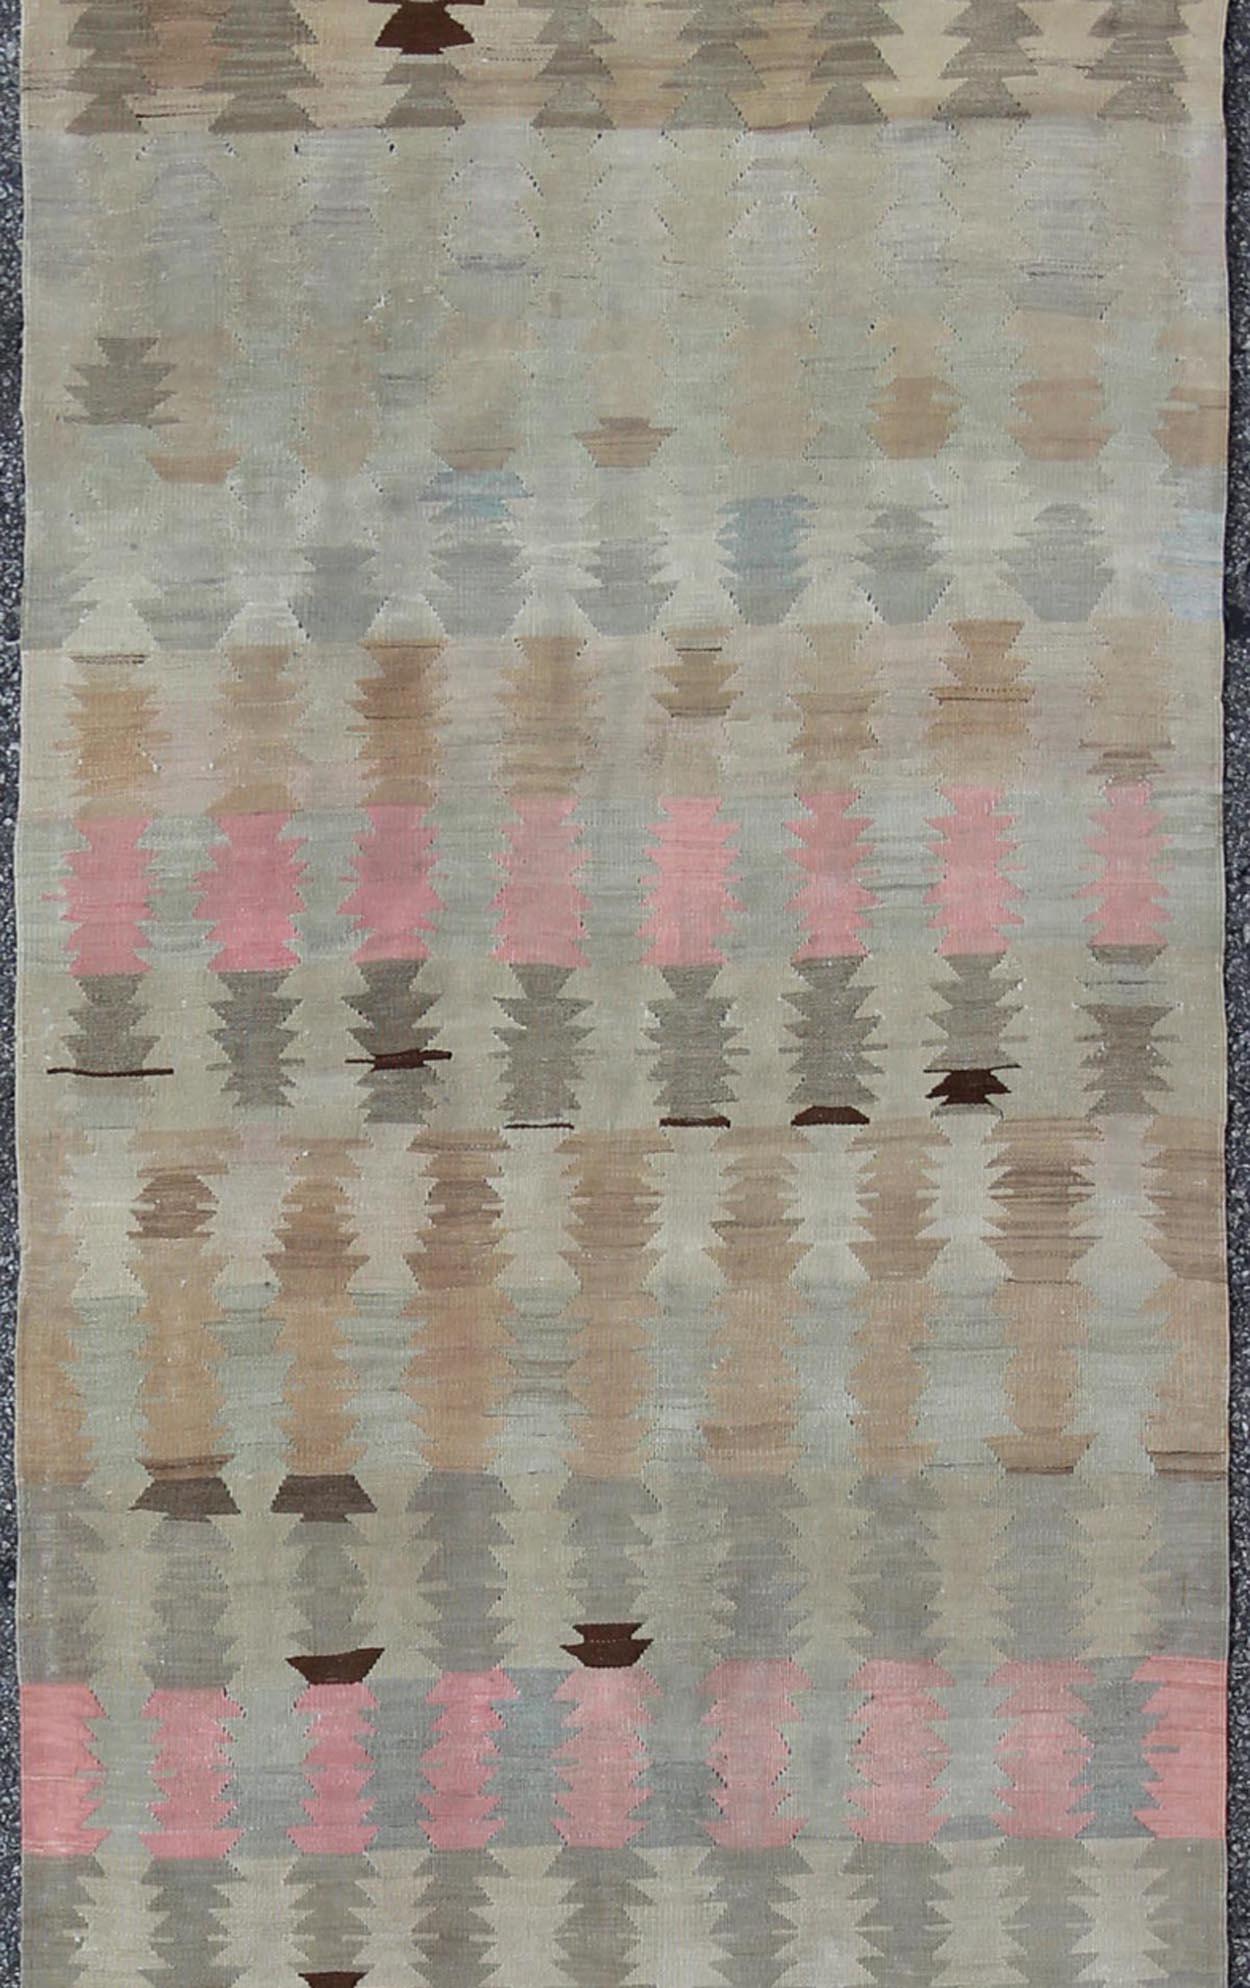 Geometric design flat-weave Kilim runner from Turkey in neutral, muted colors, rug/EN-165685, country of origin / type: Turkey / Kilim, circa 1950

Featuring a beautiful geometric design rendered in muted tones, this unique midcentury Kilim runner